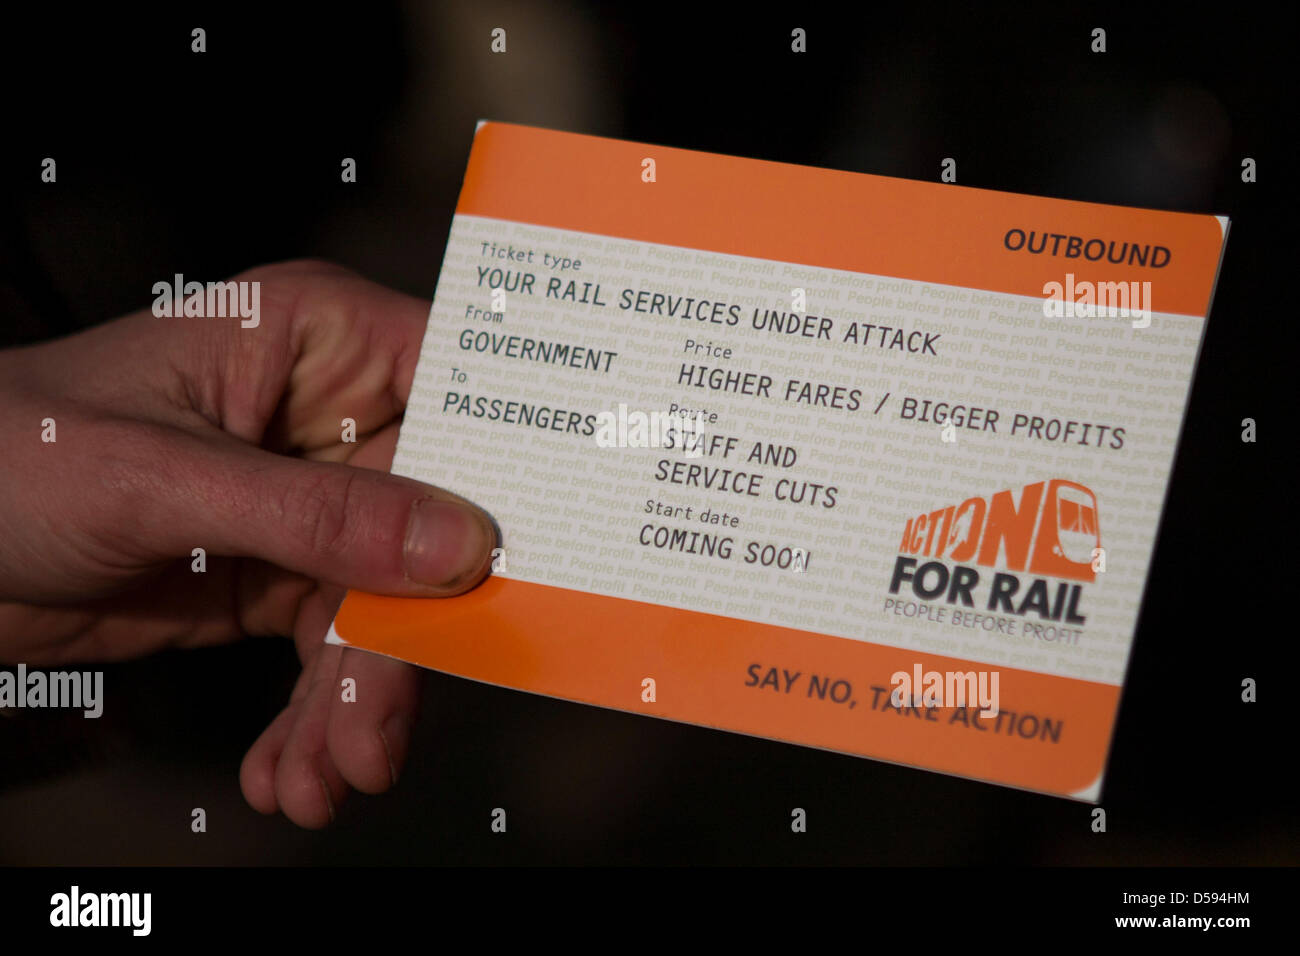 London, UK. 27th March 2013. Leaflet handed out by rail campaigners at Euston station to mark the fiftieth anniversary of the Beeching Report by holding protests at over 35 stations throughout the UK against planned new cuts to services and staff. The protests, organised by the TUC and rail union's Action for Rail campaign, come as train operating companies plan to cut staffing at stations and on trains, the union's say. Credit: martyn wheatley / Alamy Live News Stock Photo